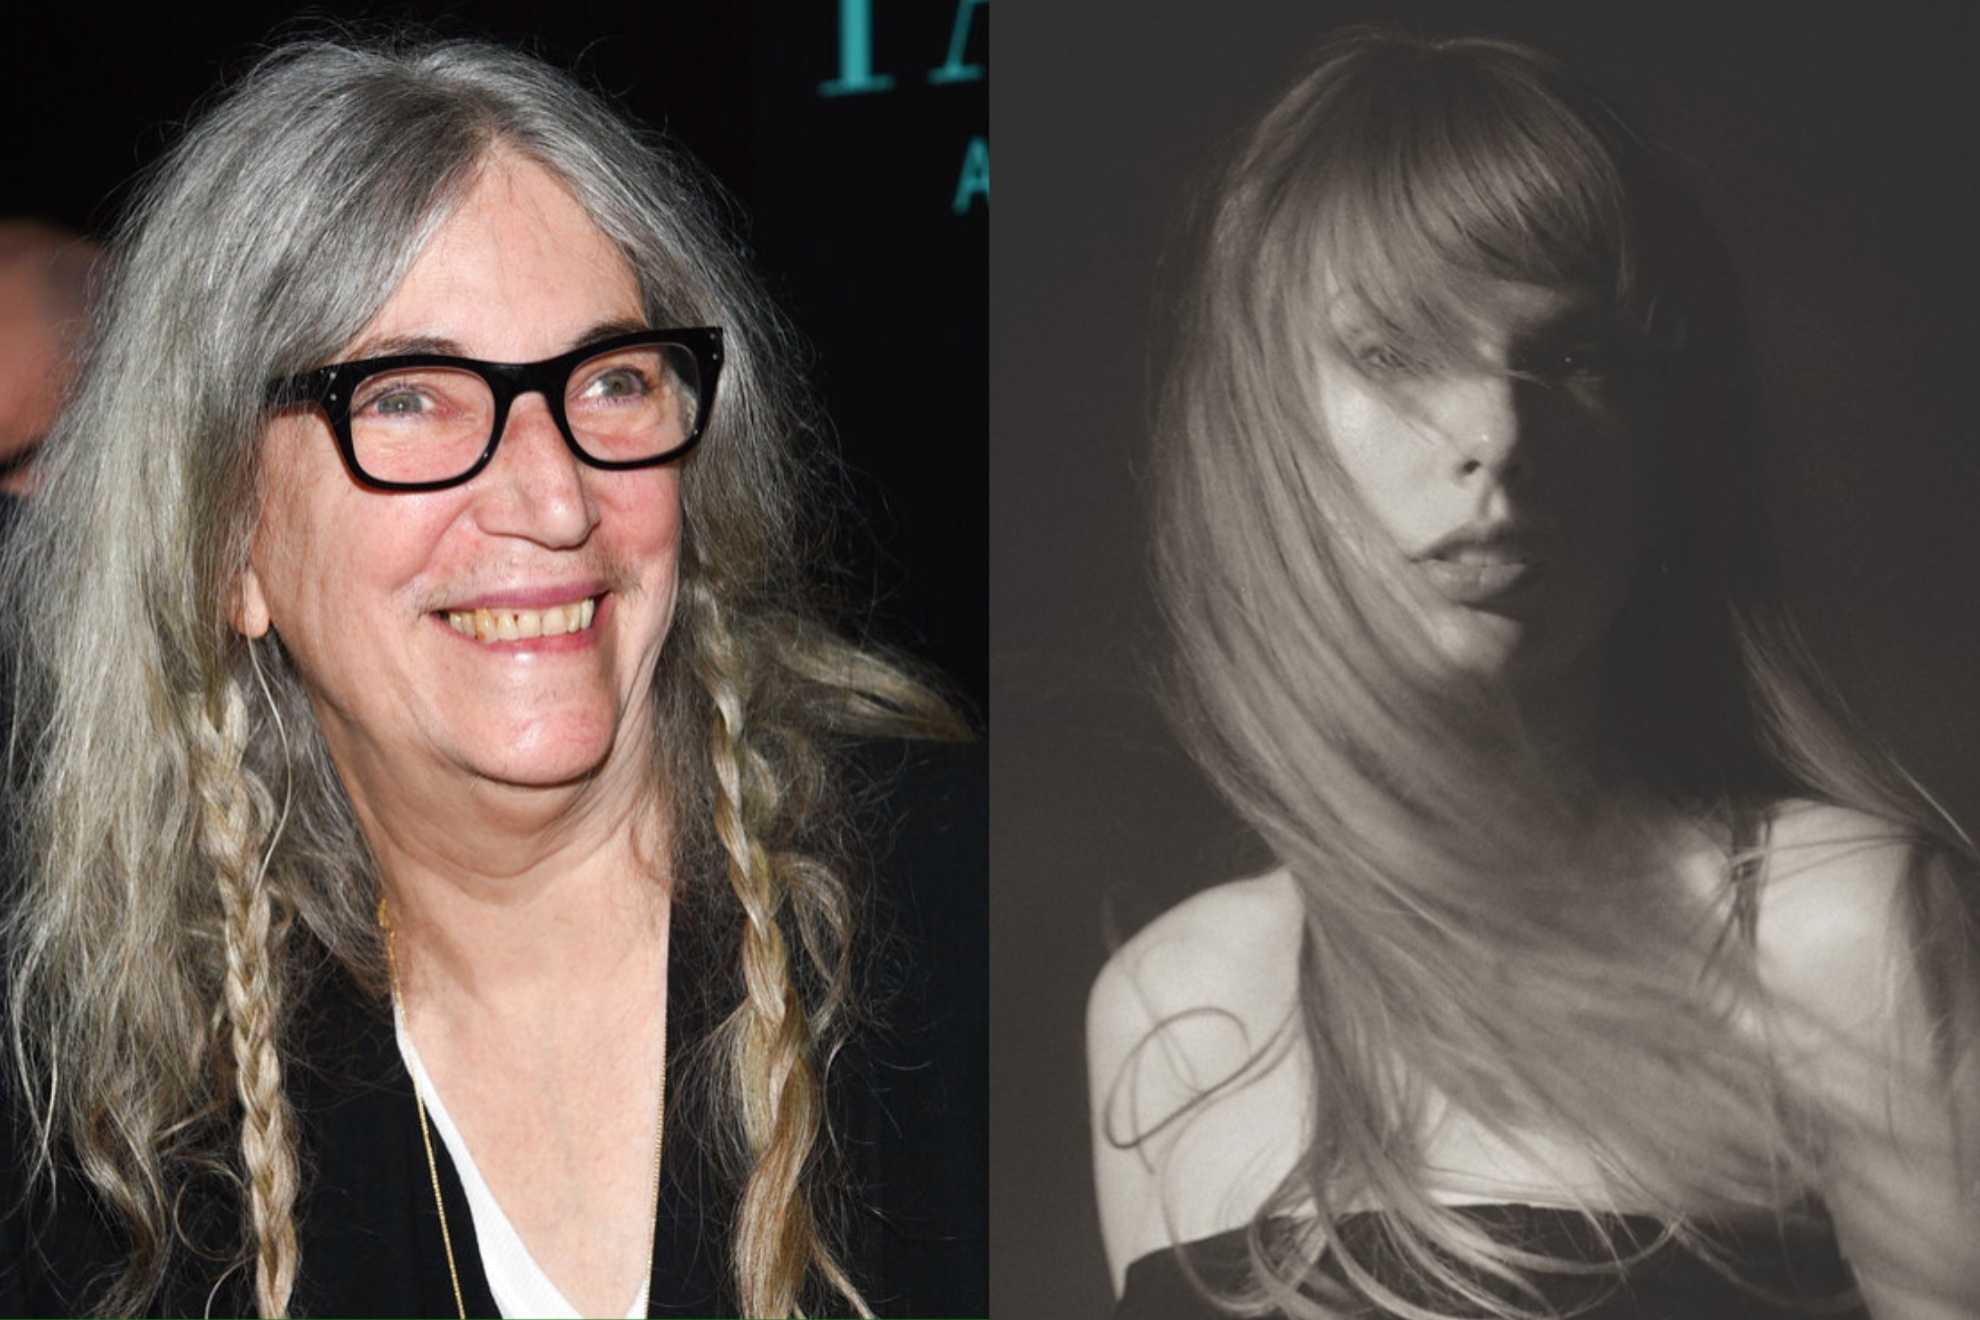 Taylor Swift mentioned Patti Smith in her new album, The Tourtured Poets Department